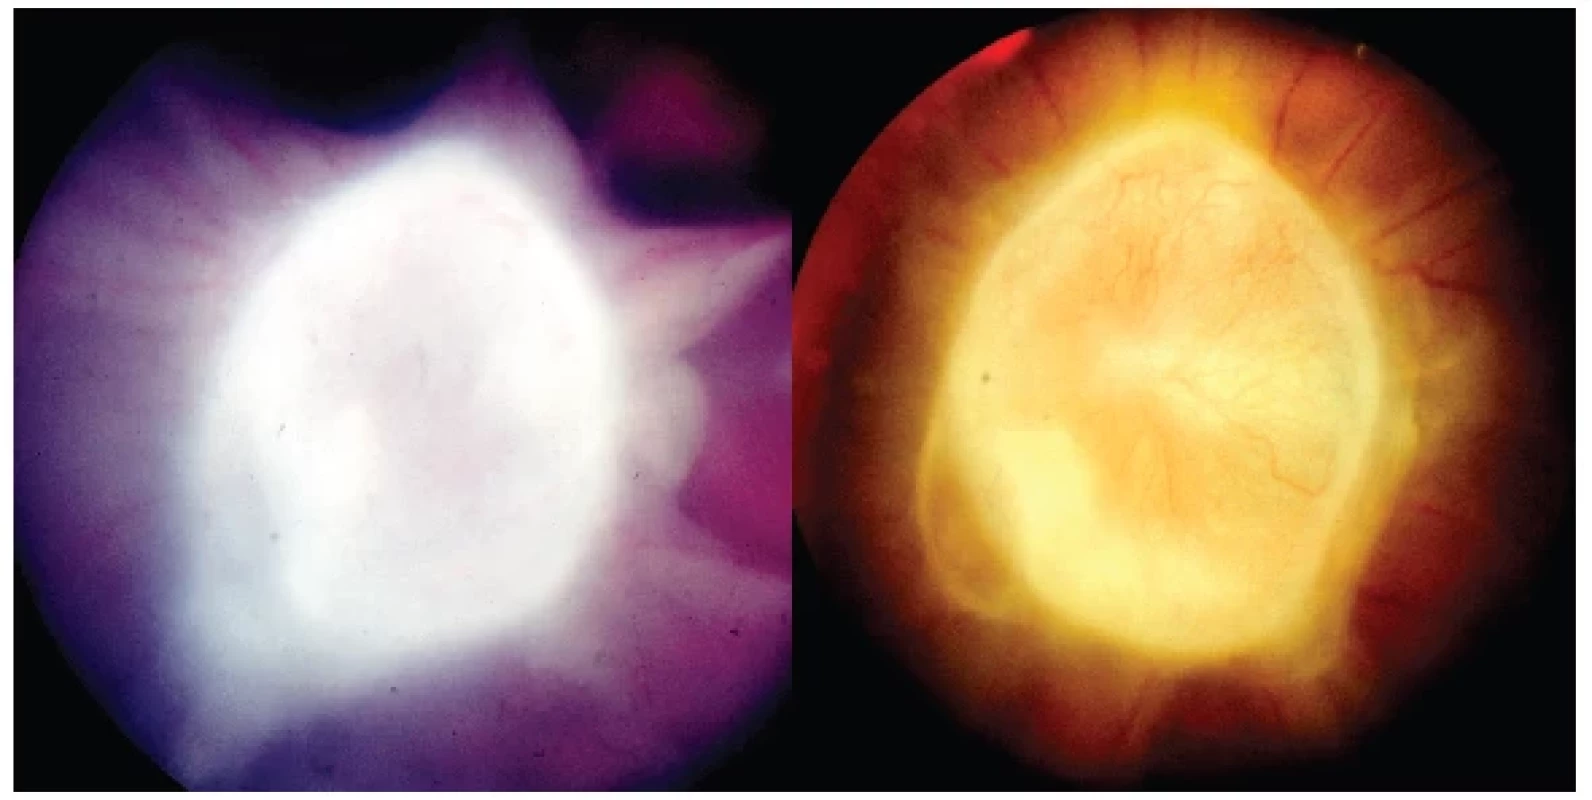 Left: Cystic granuloma of the optic nerve papilla of toxocara etiology with vitreous streaks before general therapy
Right: Cystic granuloma of the optic nerve papilla of toxocar etiology with capillaries on its surface six months after combined treatment
